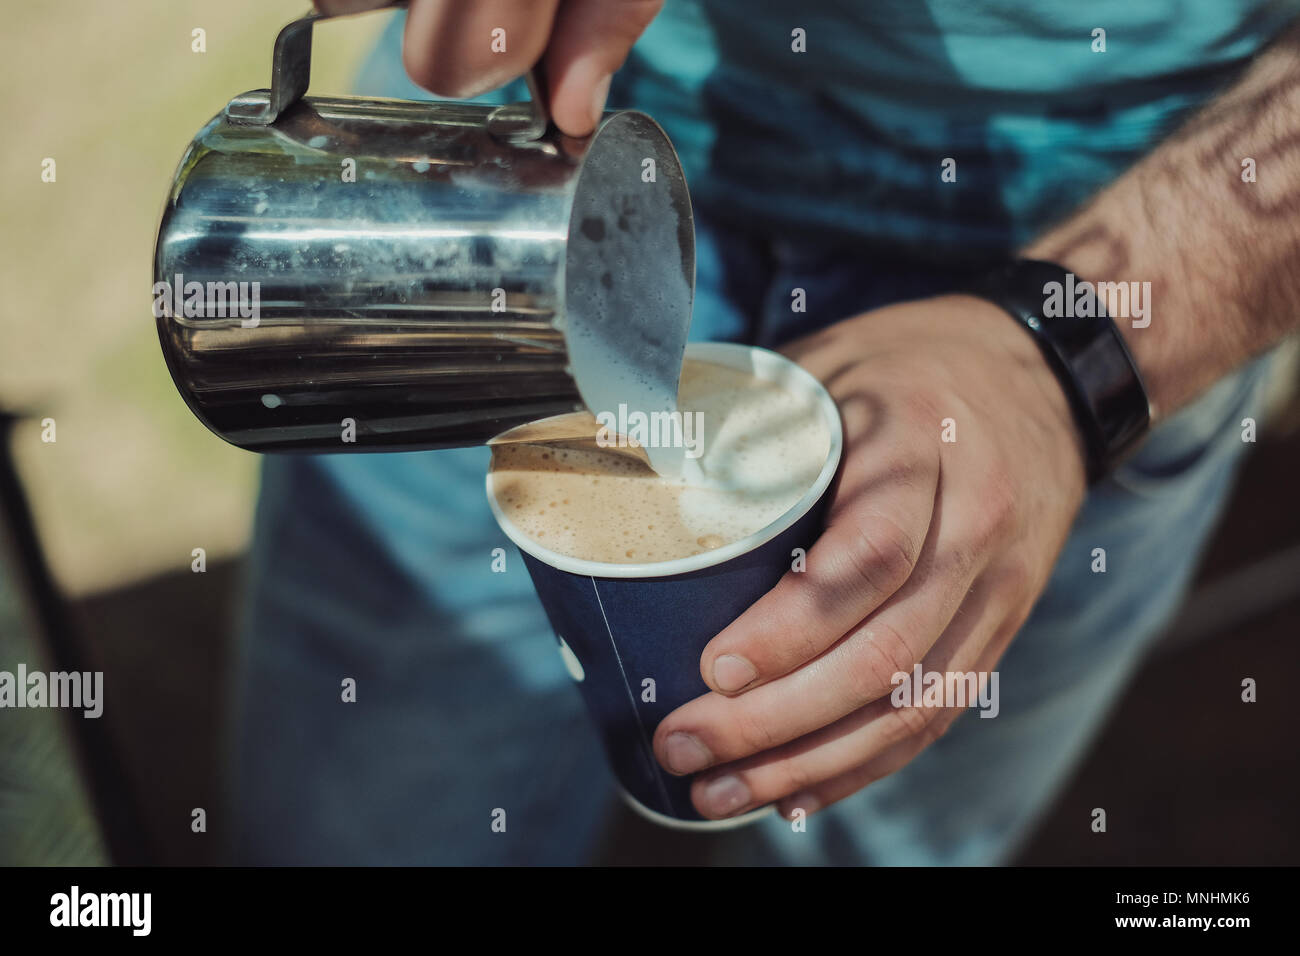 A barista pours steamed milk in a paper coffee cup to make a cappuccino. Old film look with shallow focus Stock Photo